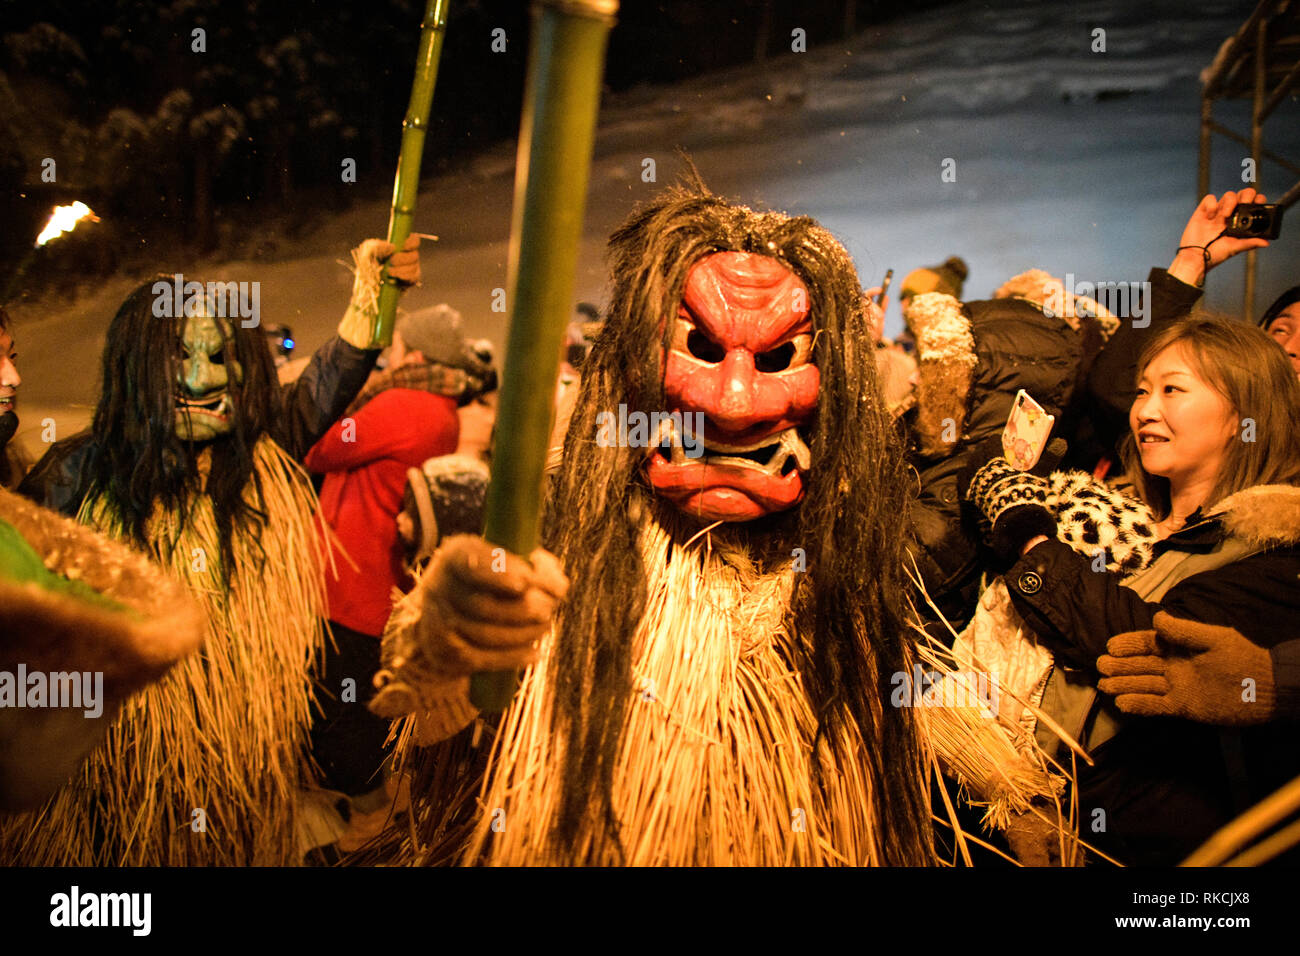 OGA, JAPAN - FEBRUARY 10: Men dressed in straw clothes and orge masks as Namahage, or mountain demons, march down from a snow mountain with flaming torches during the Namahage Sedo Festival at Shinzan Shrine on February 10, 2019 in Oga, Akita prefecture, Japan. (Photo by Richard Atrero de Guzman/Aflo) Credit: Aflo Co. Ltd./Alamy Live News Stock Photo